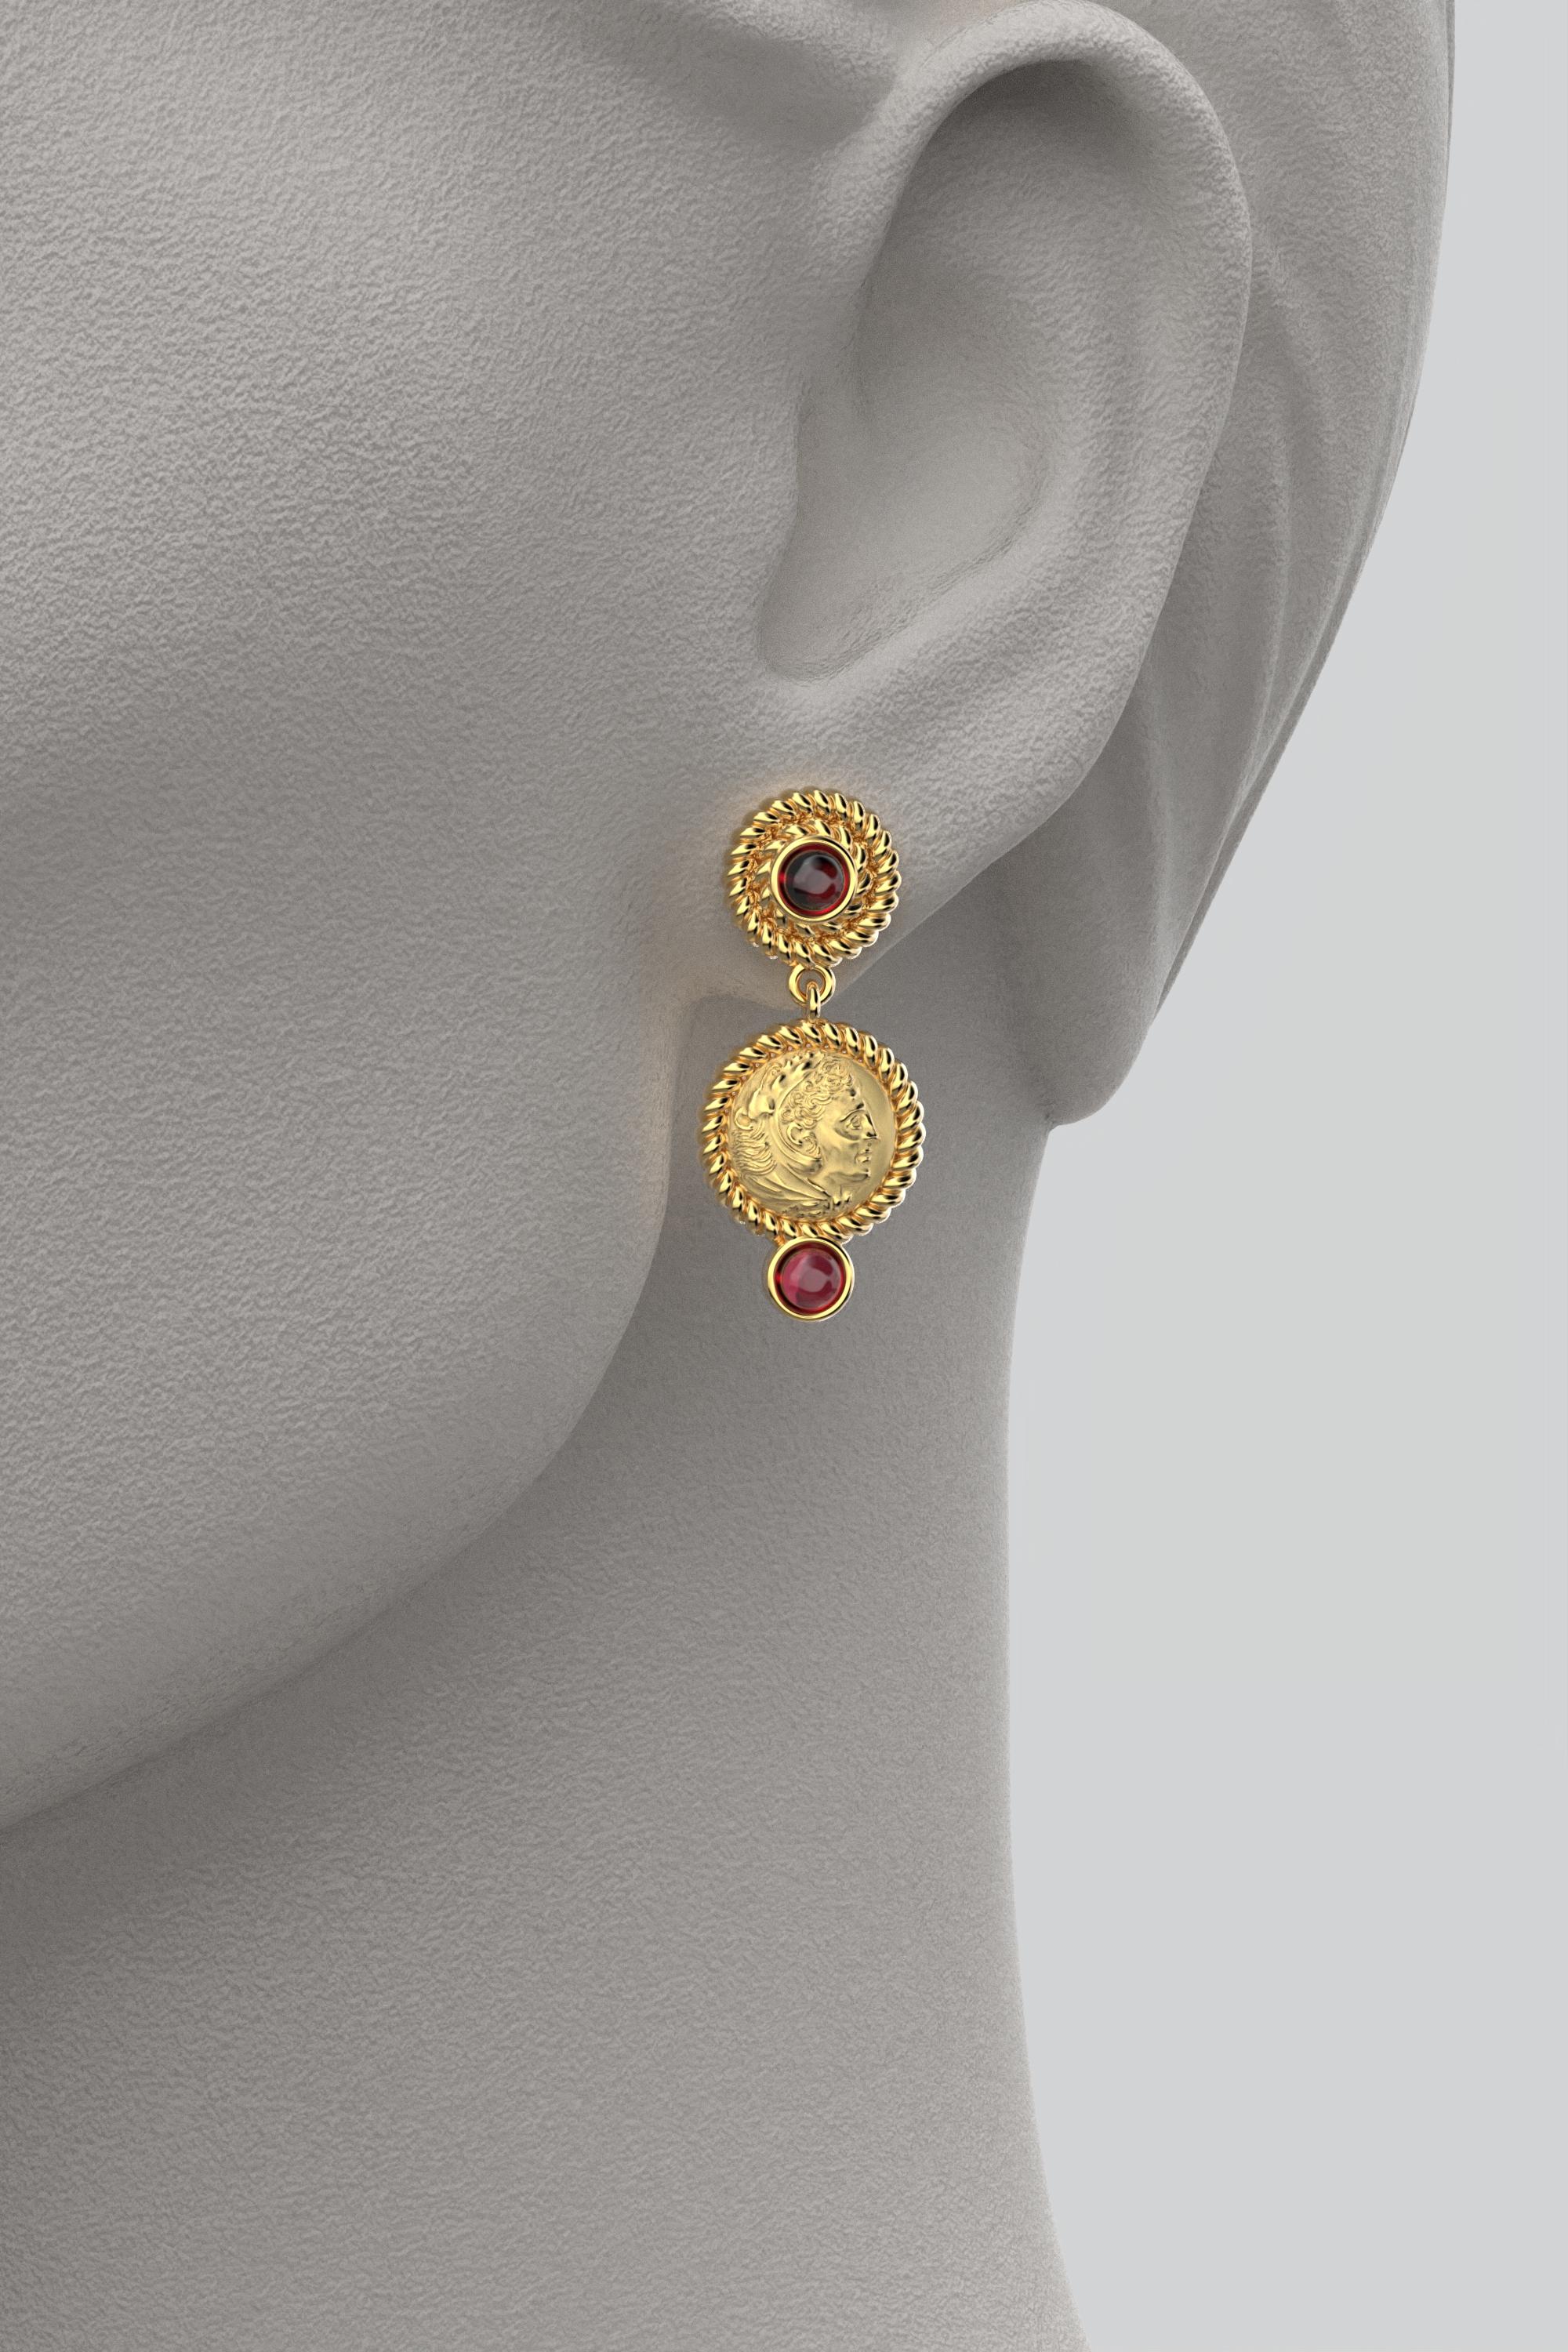 18k Gold Dangle Earrings in Ancient Greek Style | Italian Jewelry made in Italy In New Condition For Sale In Camisano Vicentino, VI